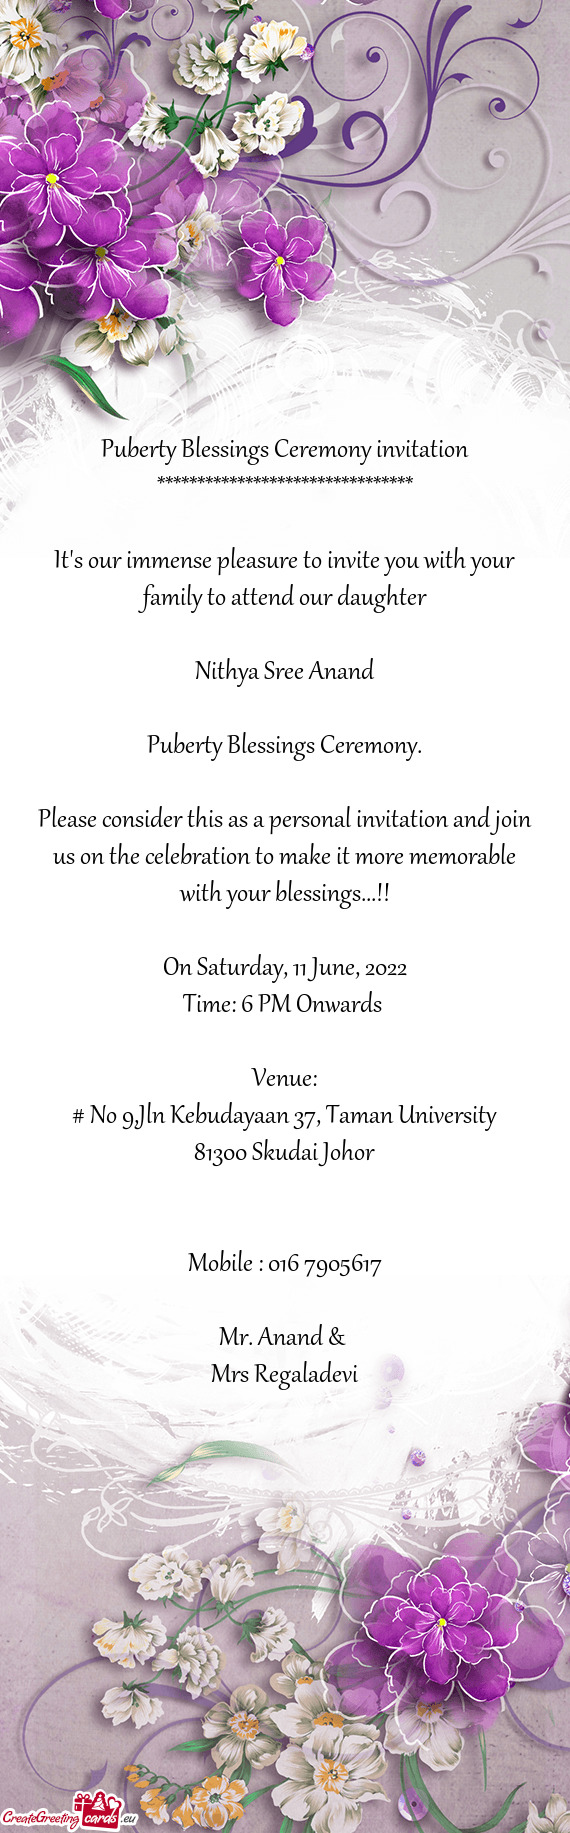 Puberty Blessings Ceremony invitation